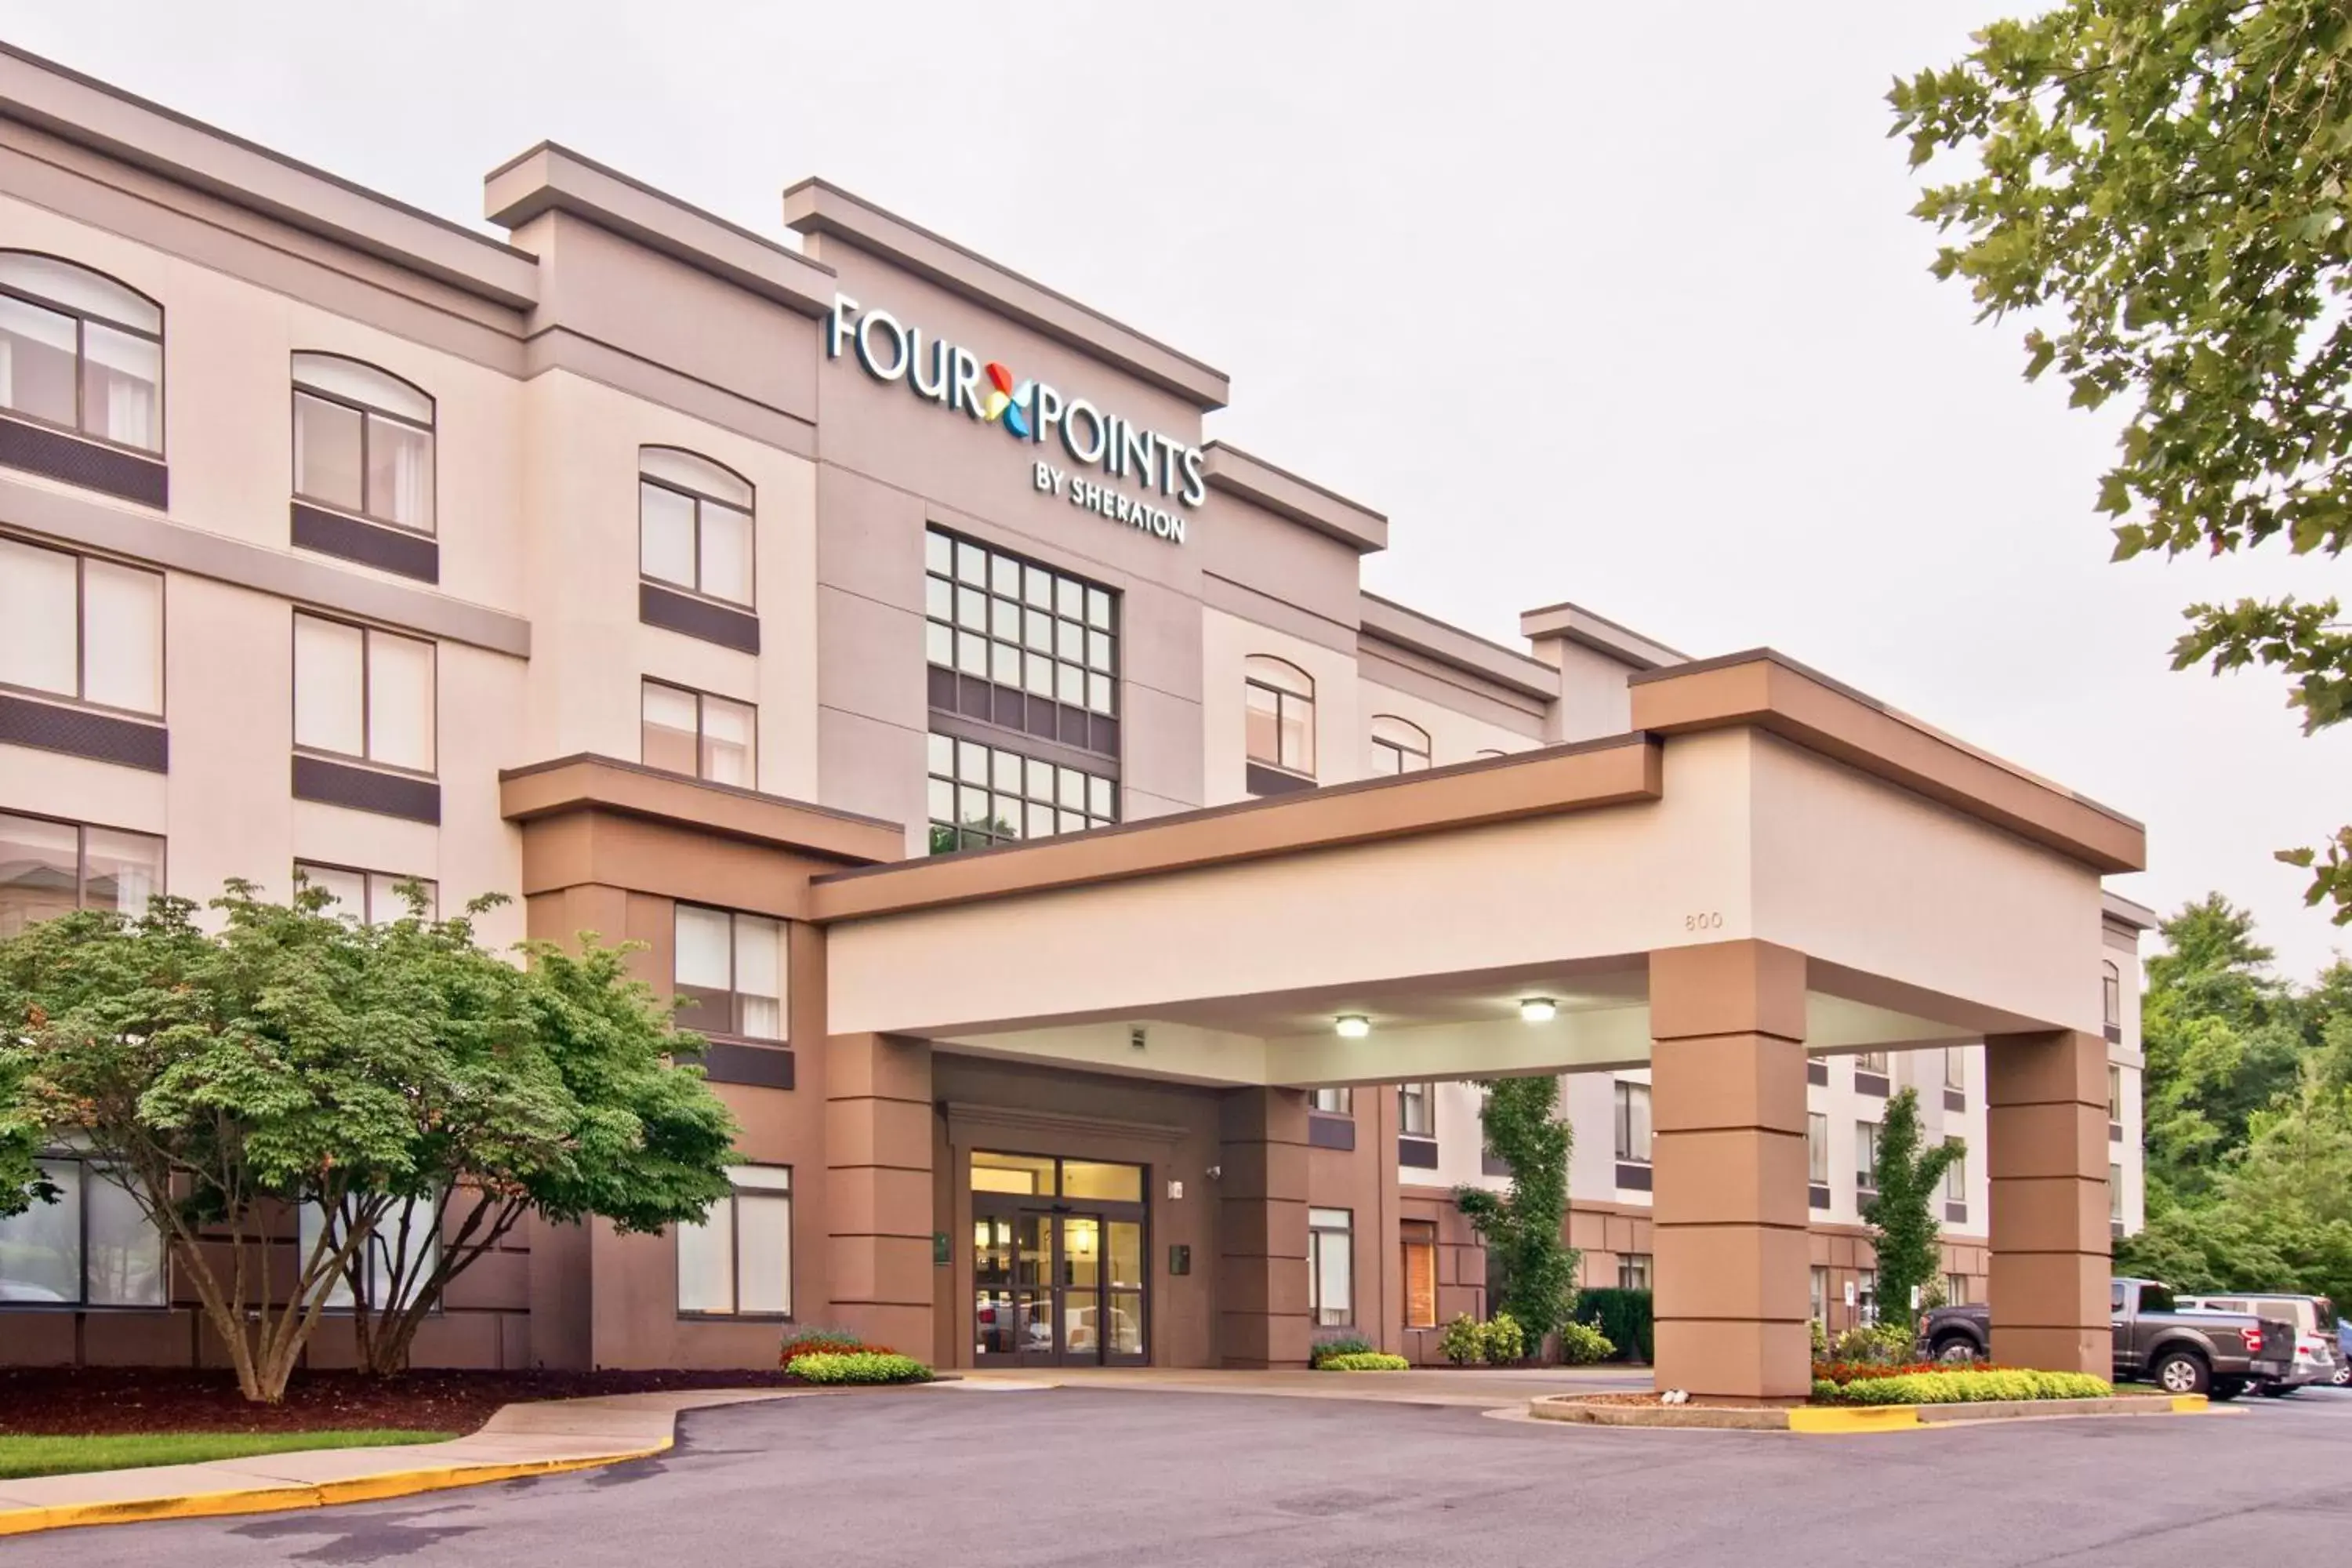 Property Building in Four Points by Sheraton Nashville Airport